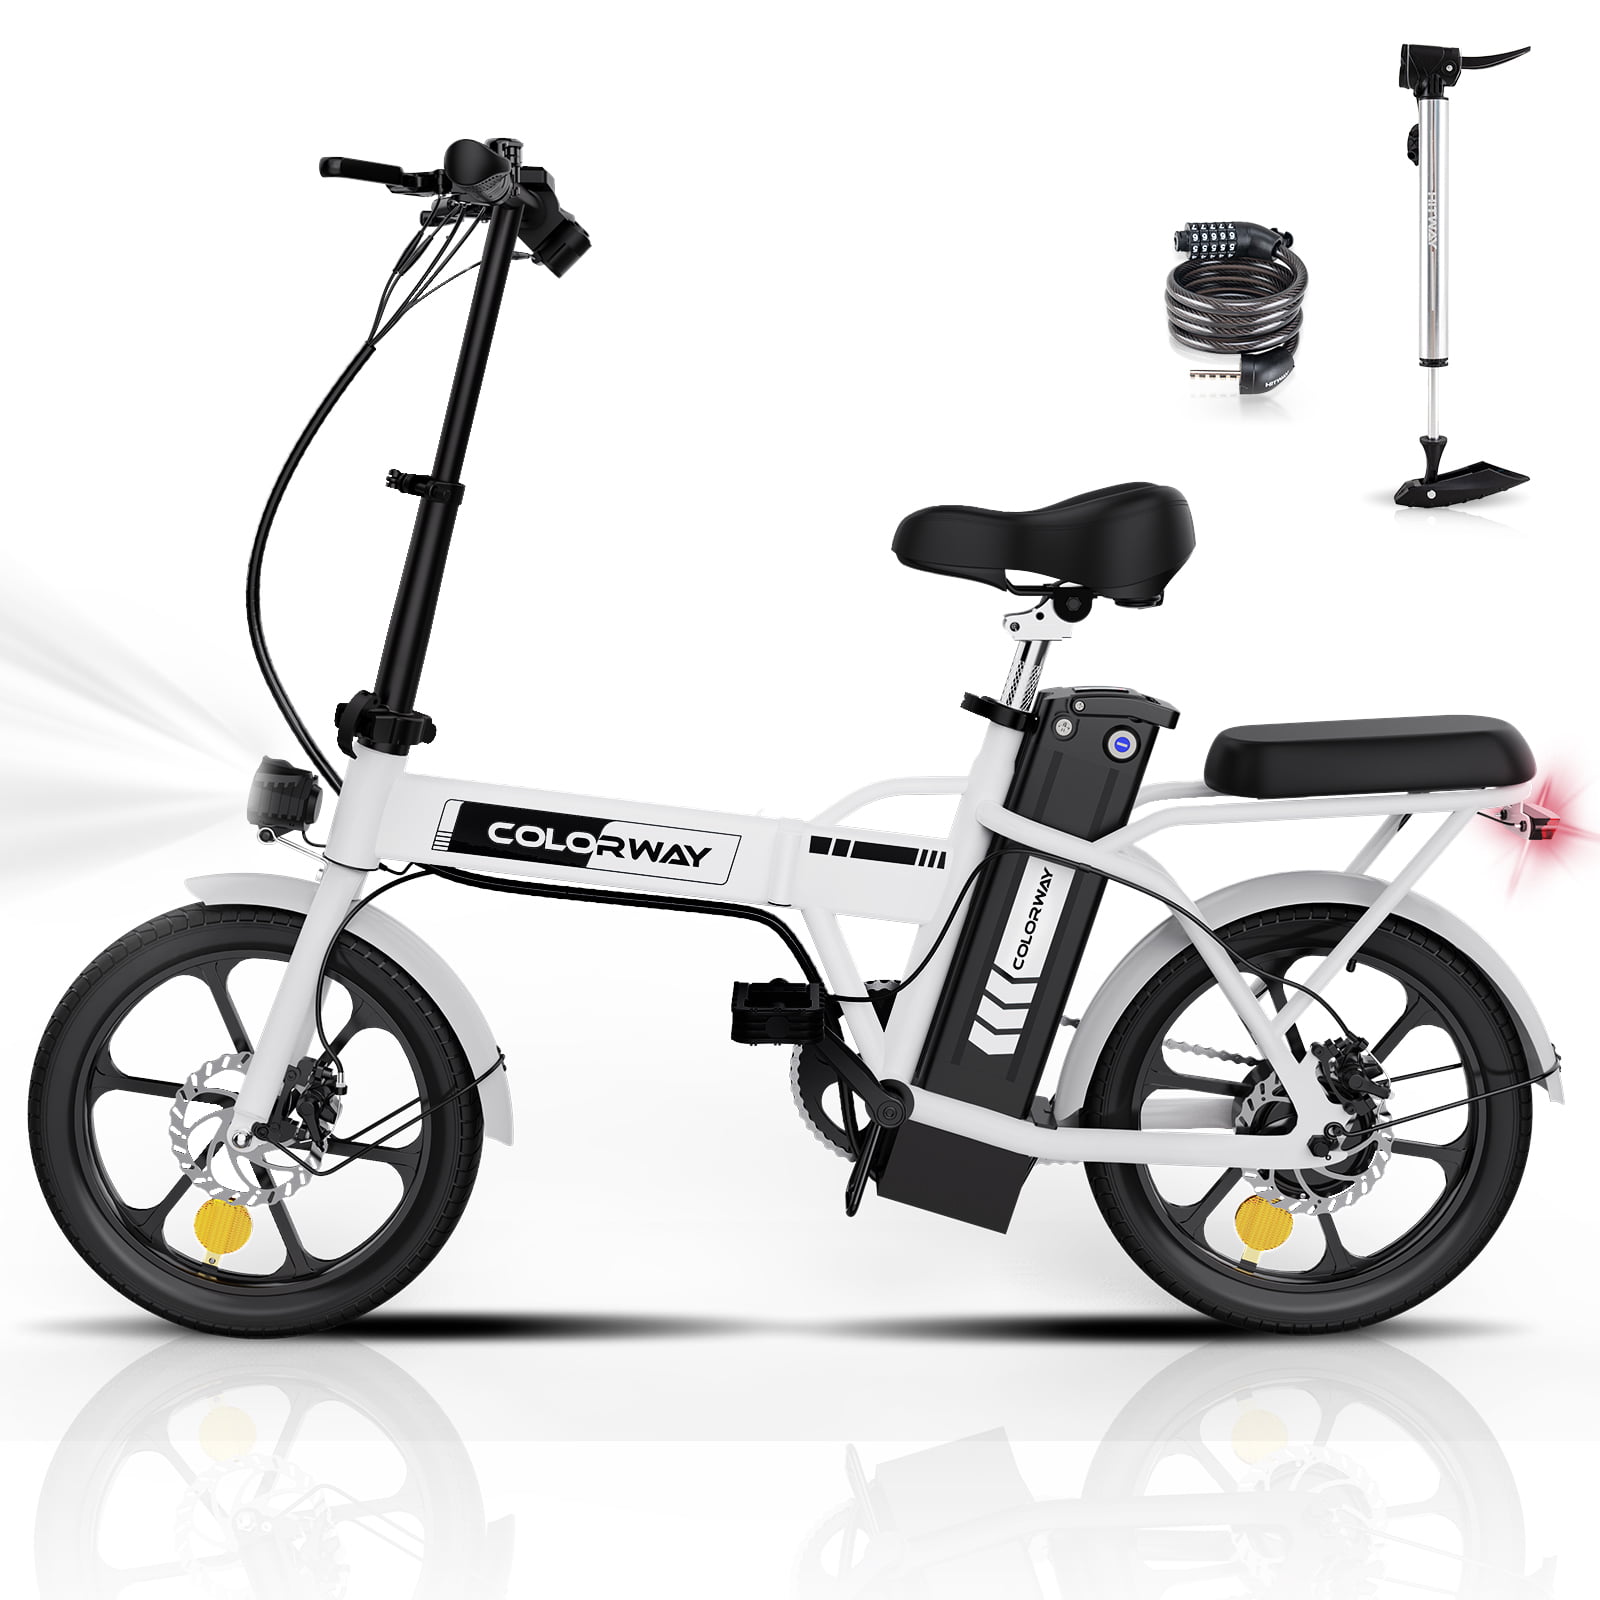 COLORWAY 500W/8.4Ah/36V, 19.9MPH Foldable Electric Bike with Removable Battery